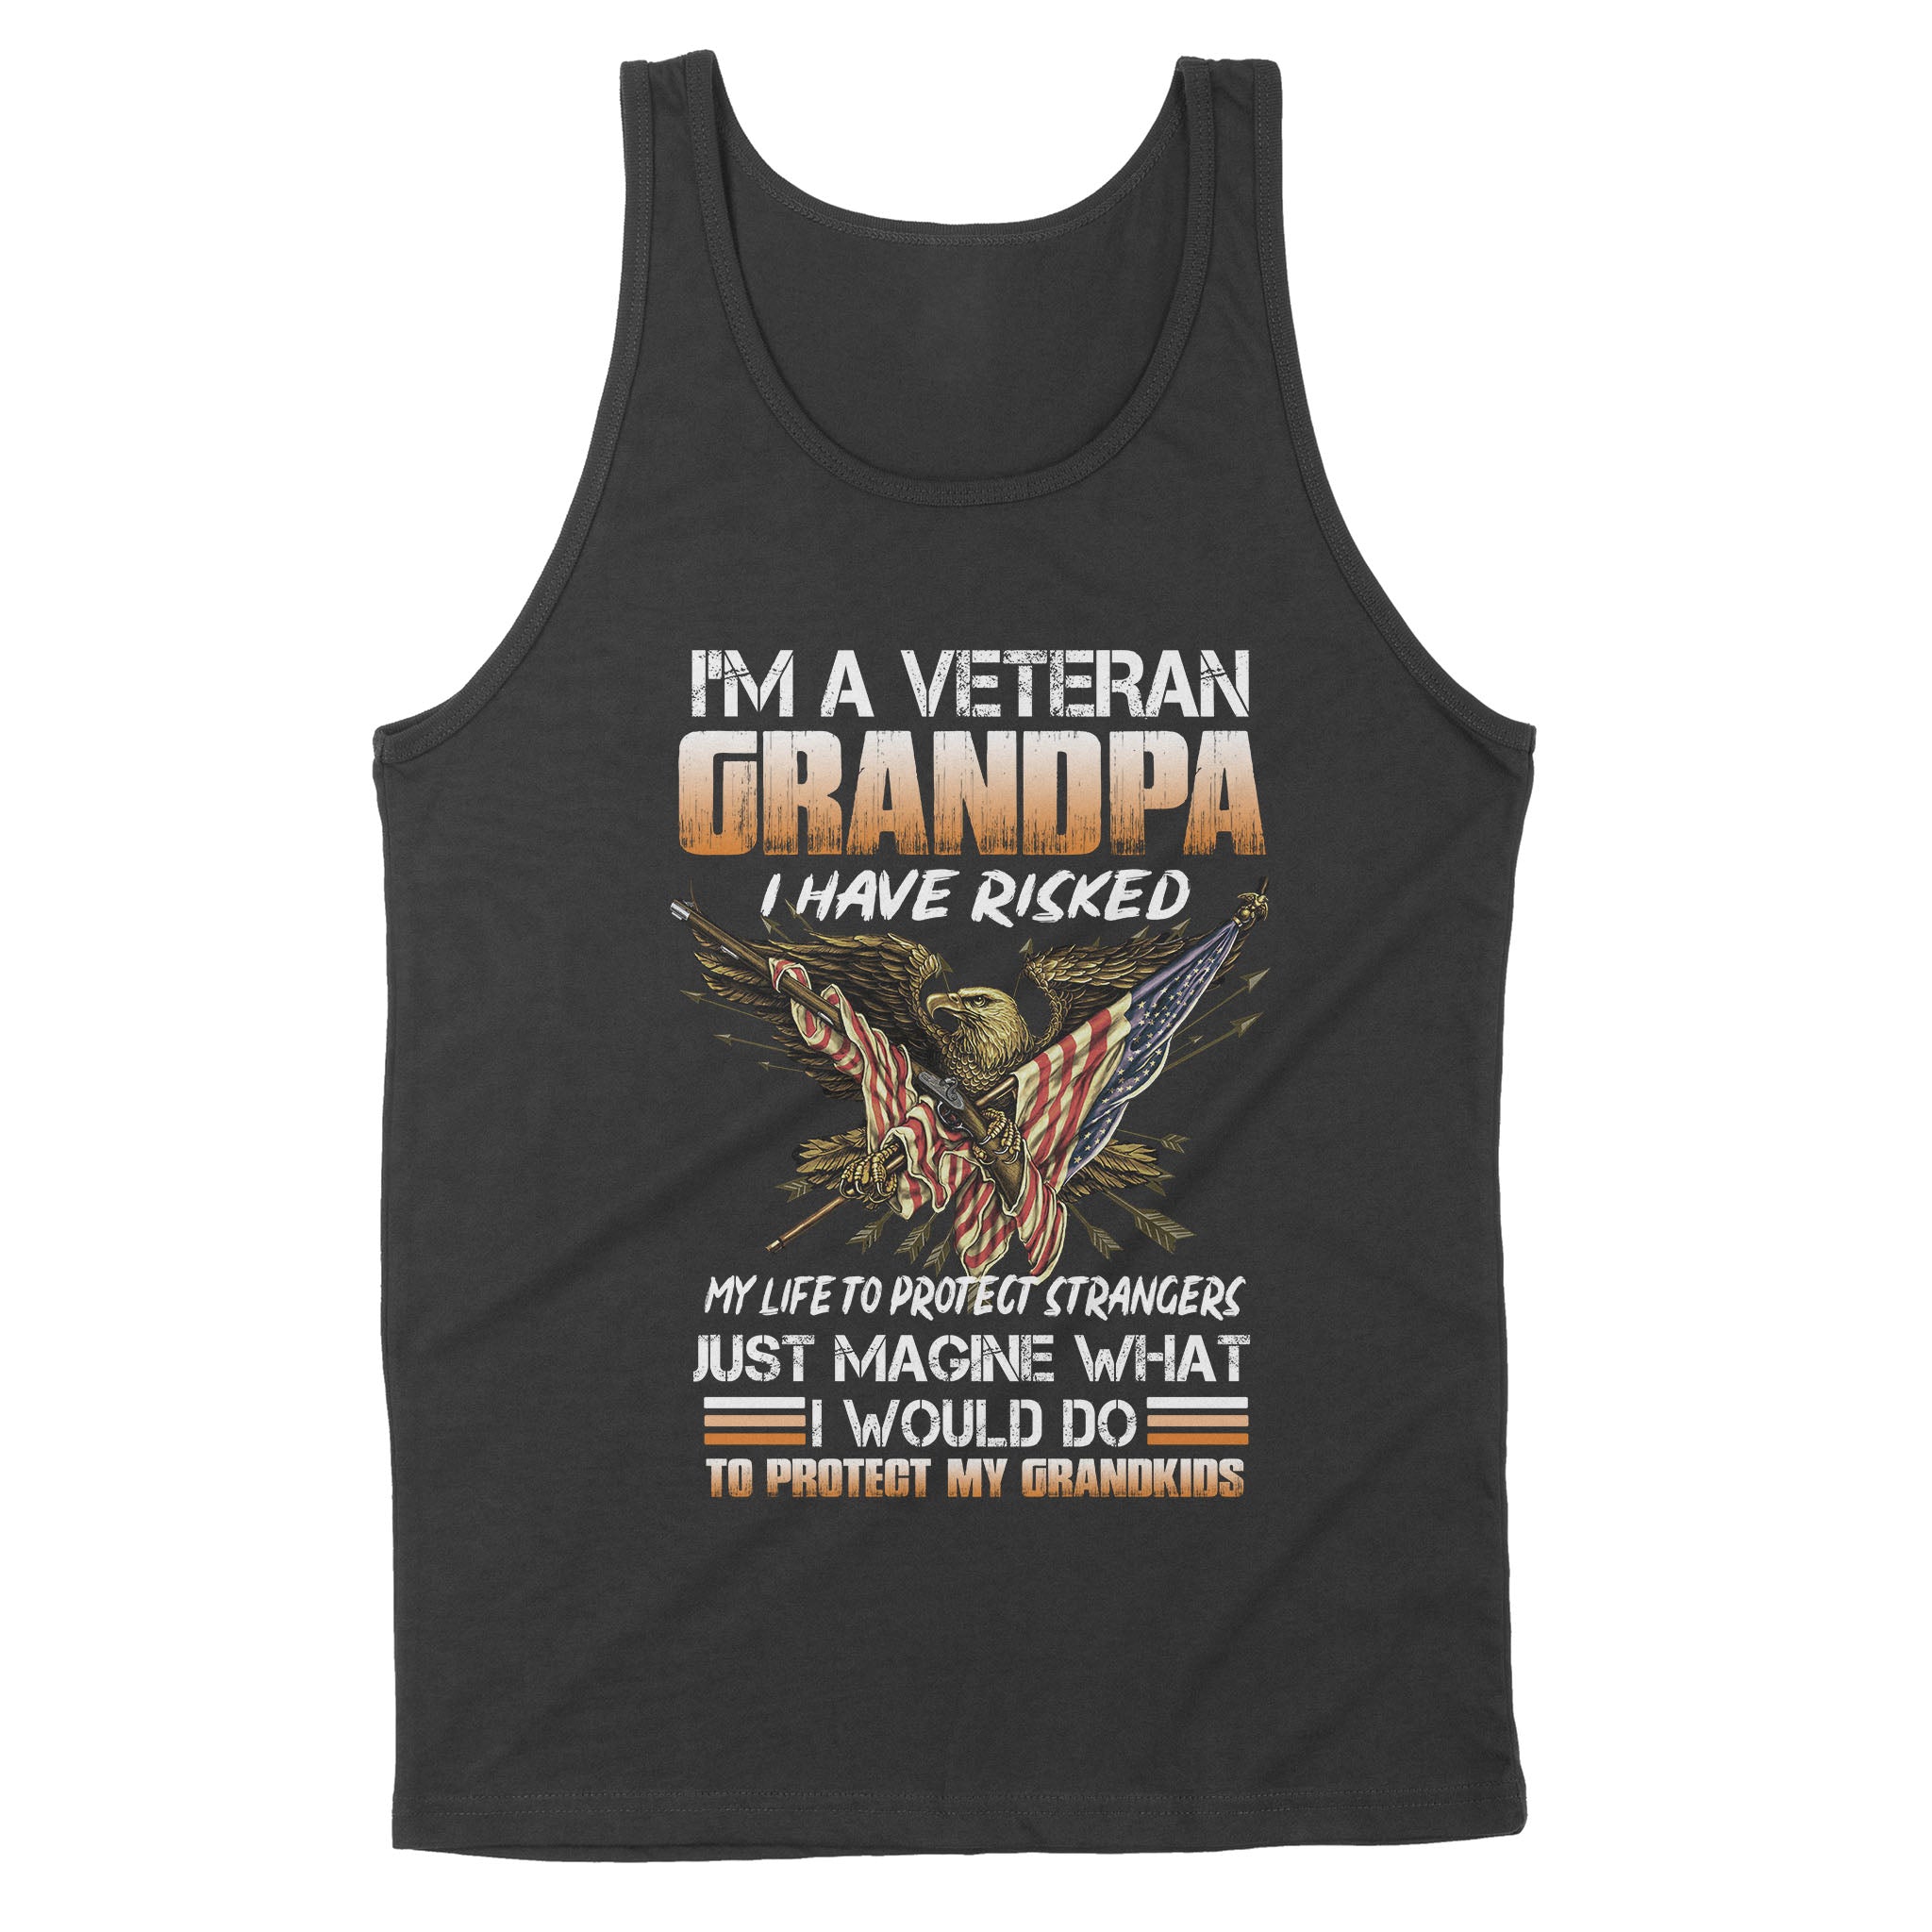 I'm a Veteran grandpa, I would do to protect my grandkids, gift for grandfather NQS773 - Standard Tank